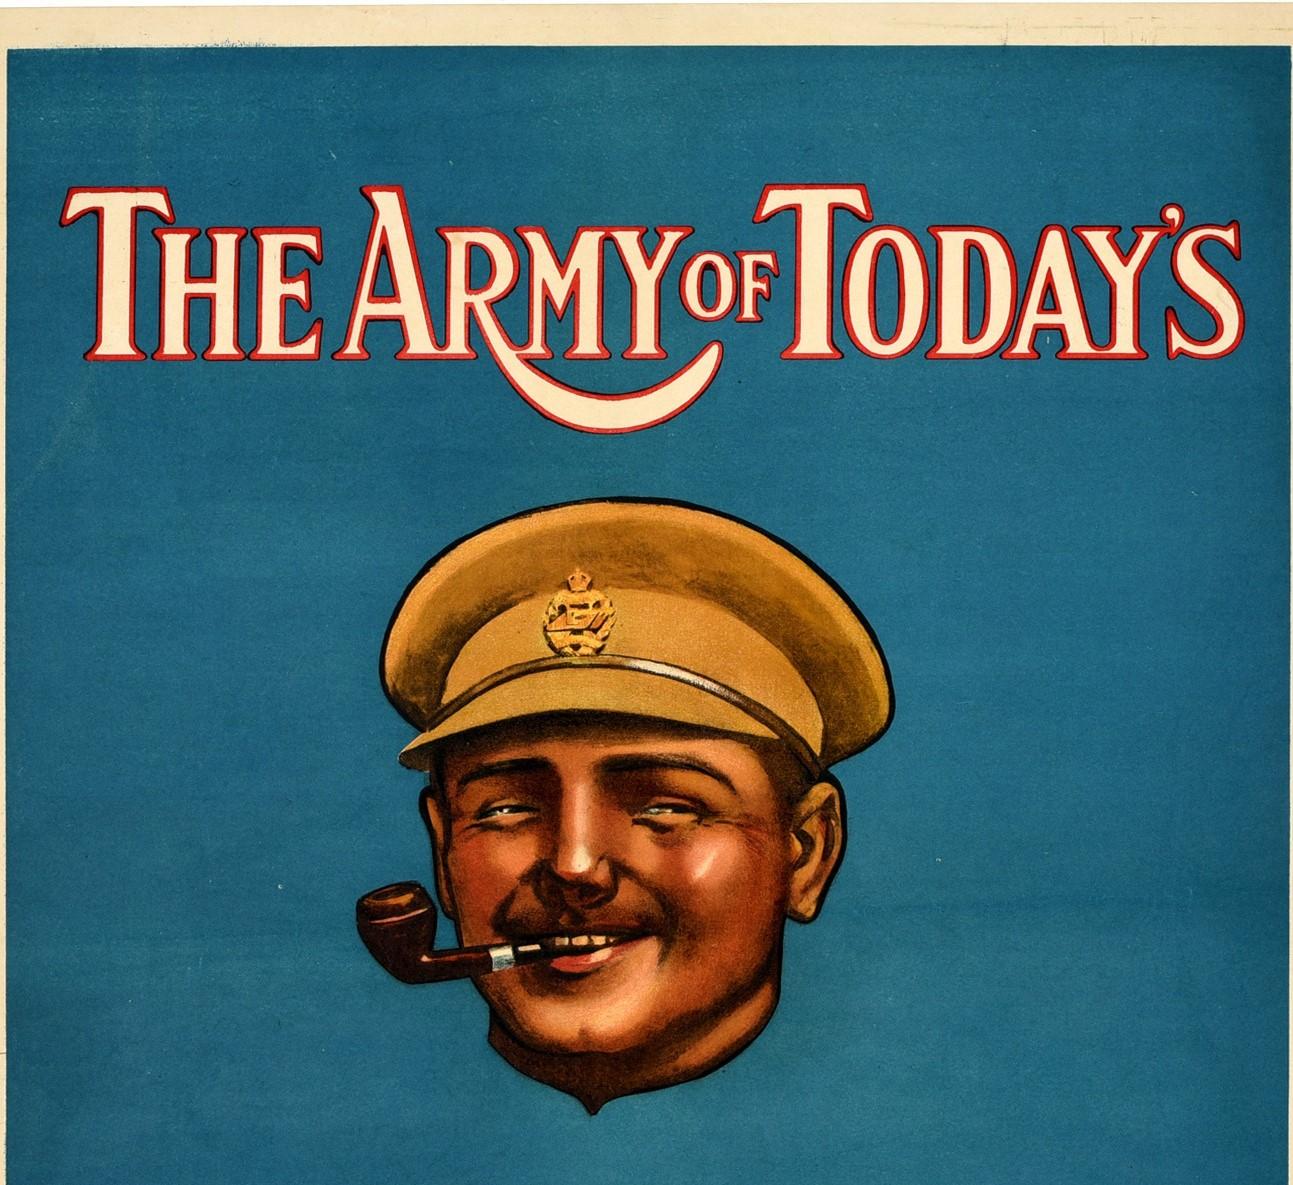 join the army ww1 poster